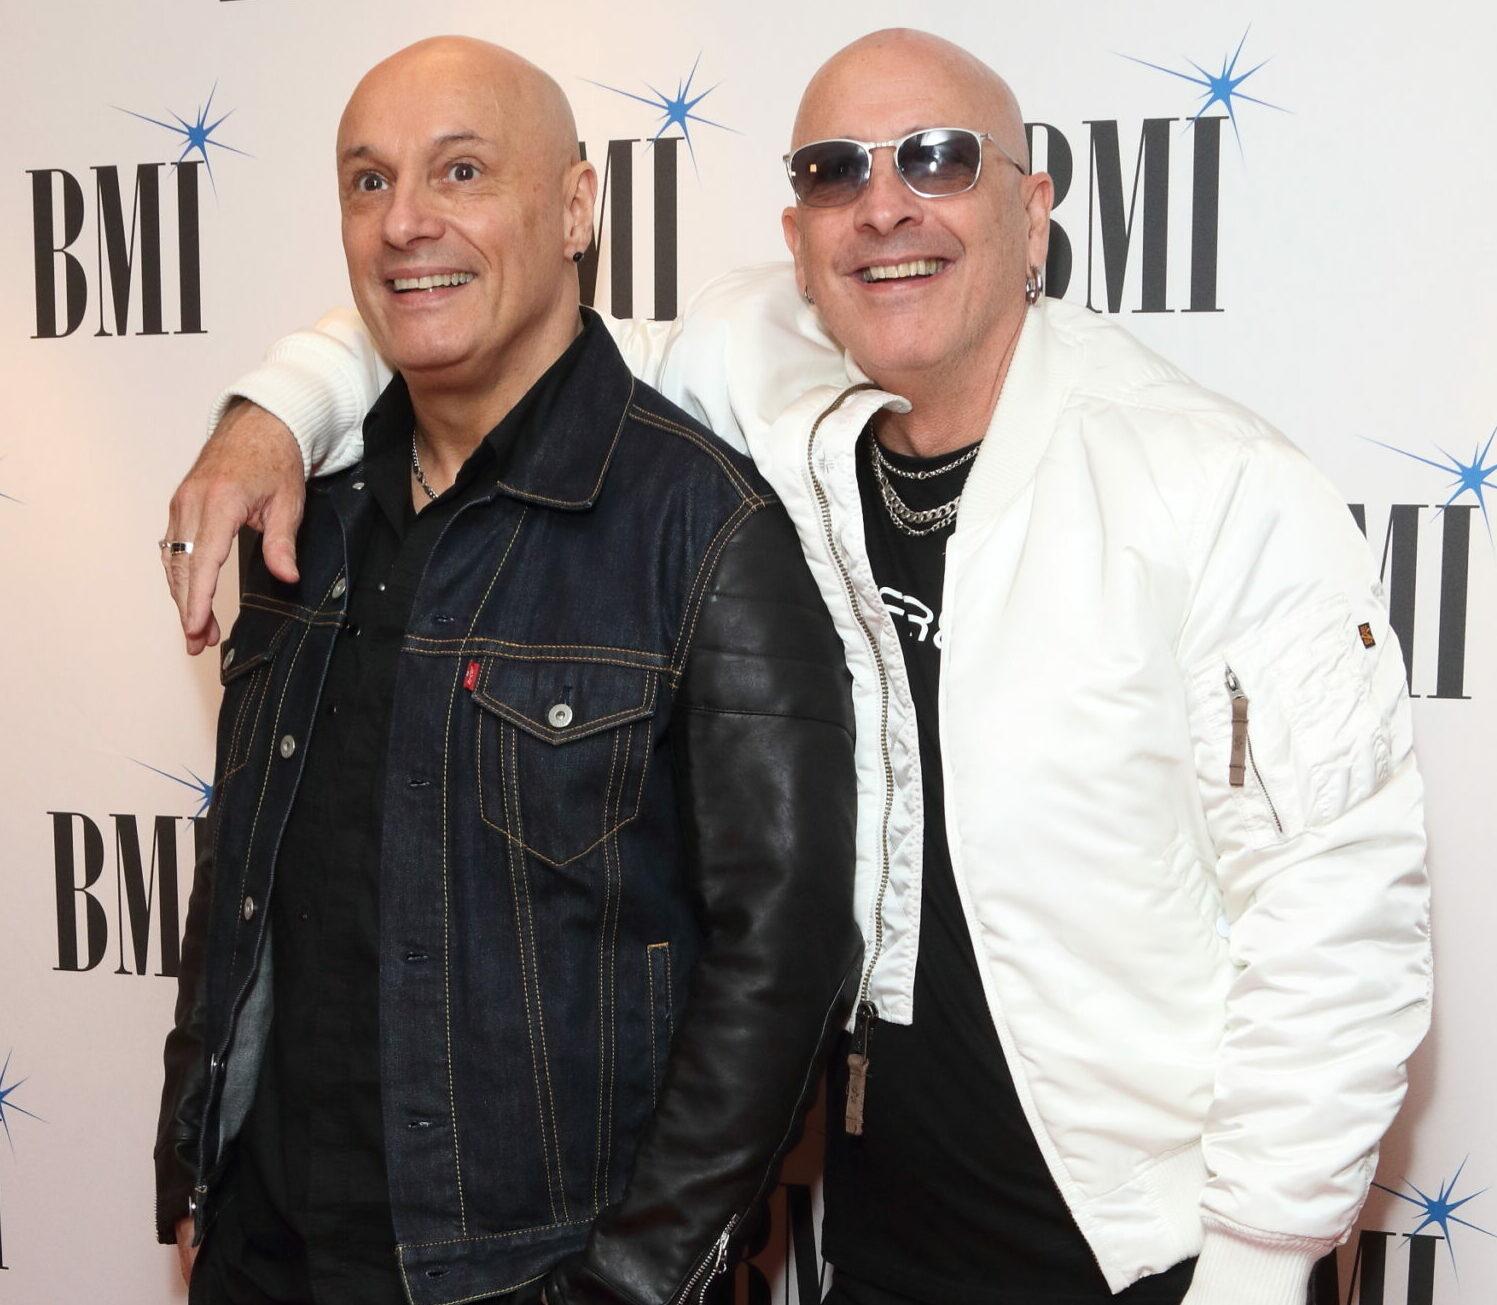 Right Said Fred at BMI London Awards at The Dorchester, Park Lane, London on Monday 1st October 2018